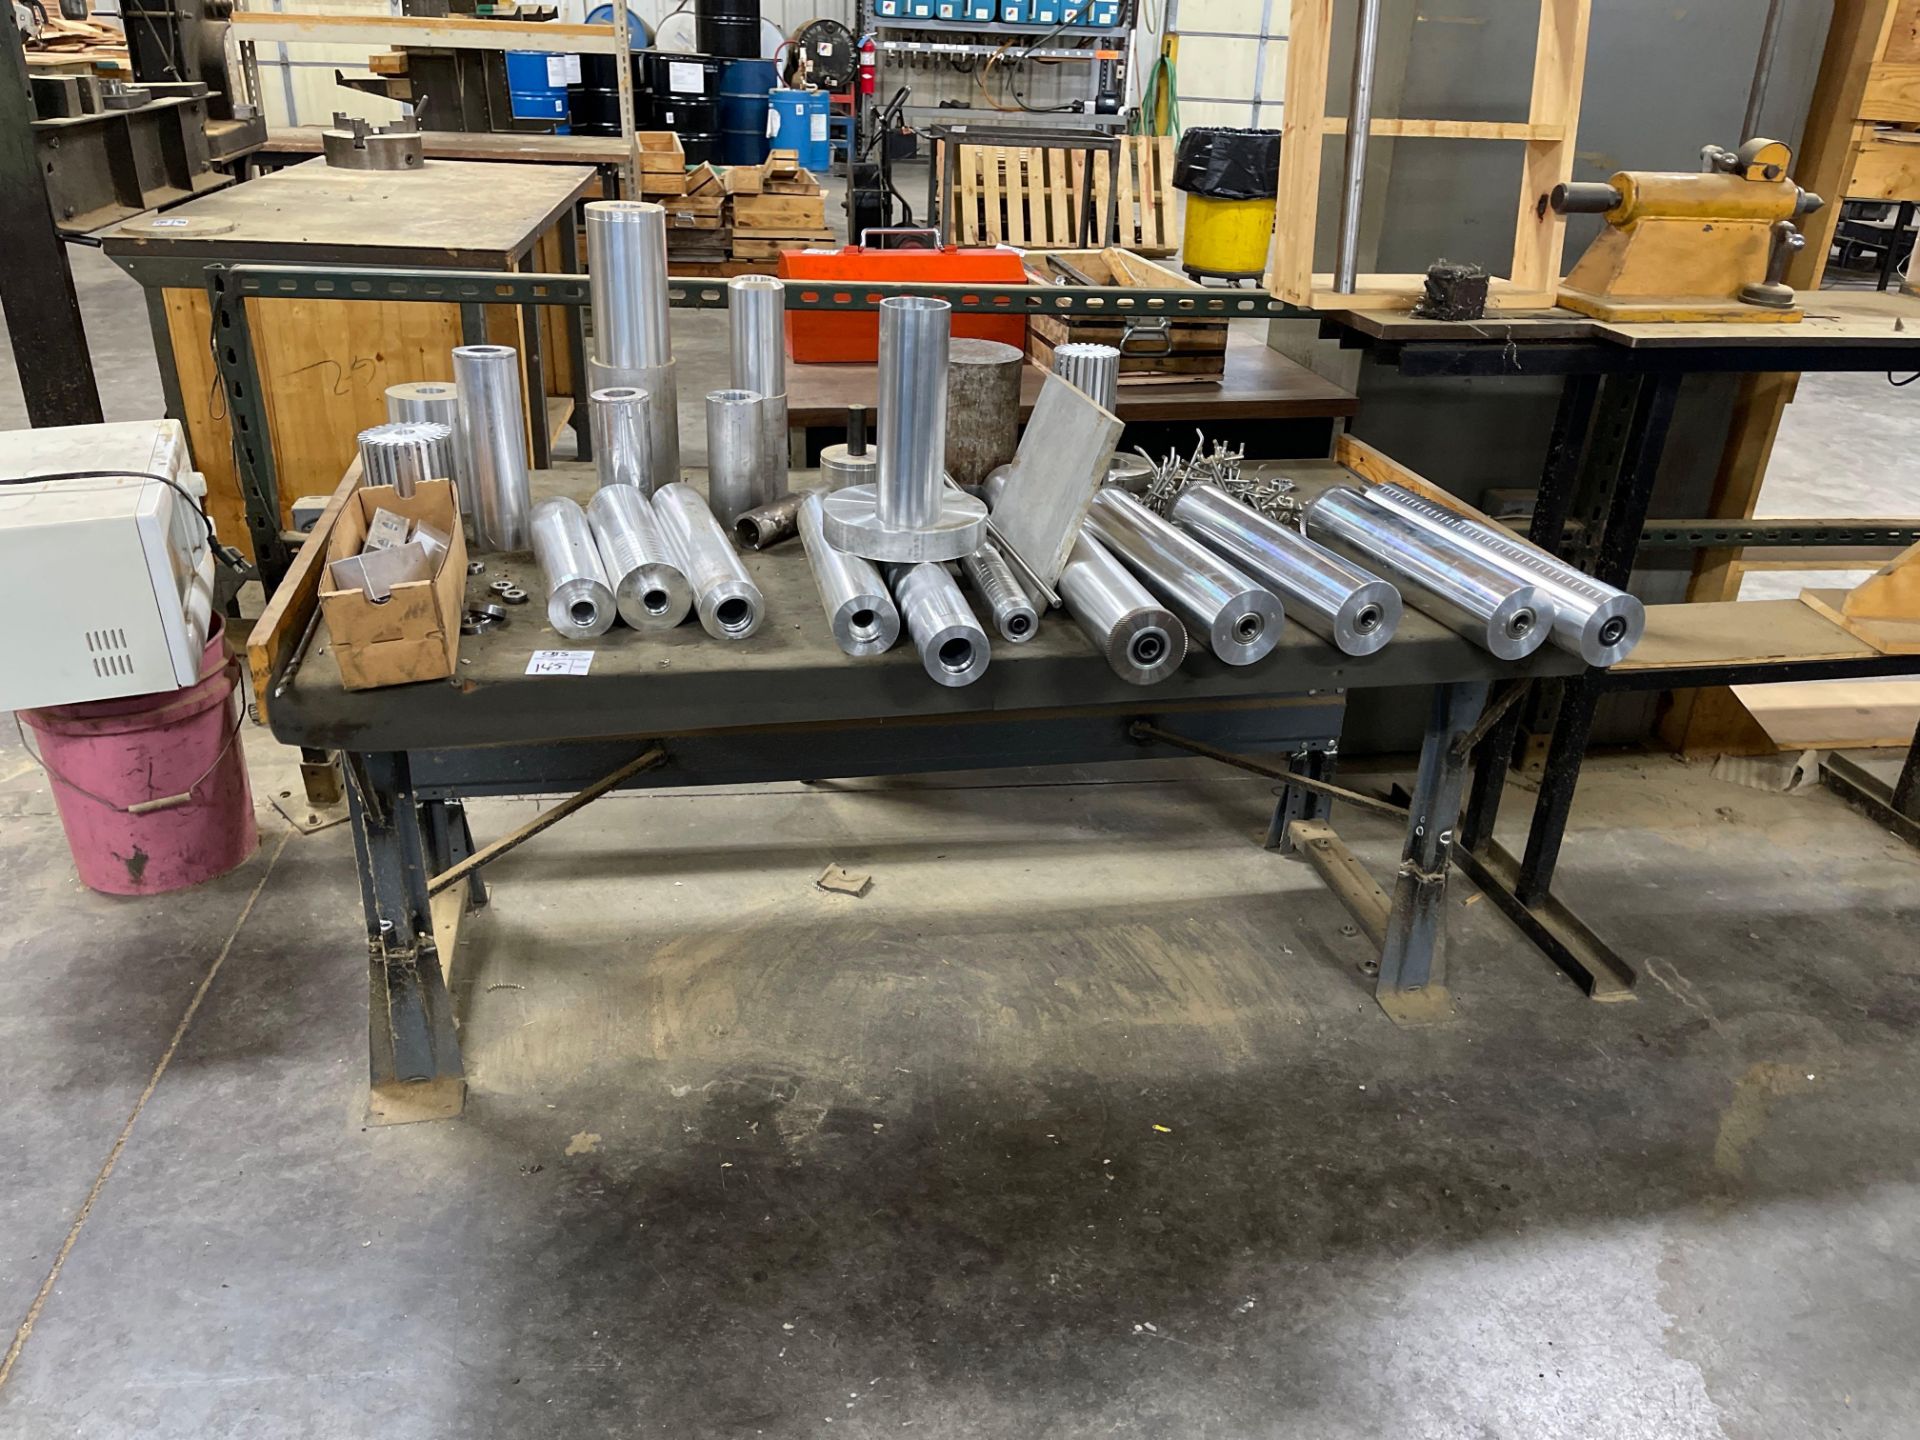 Work Bench w/ Aluminum Molds for Dyes